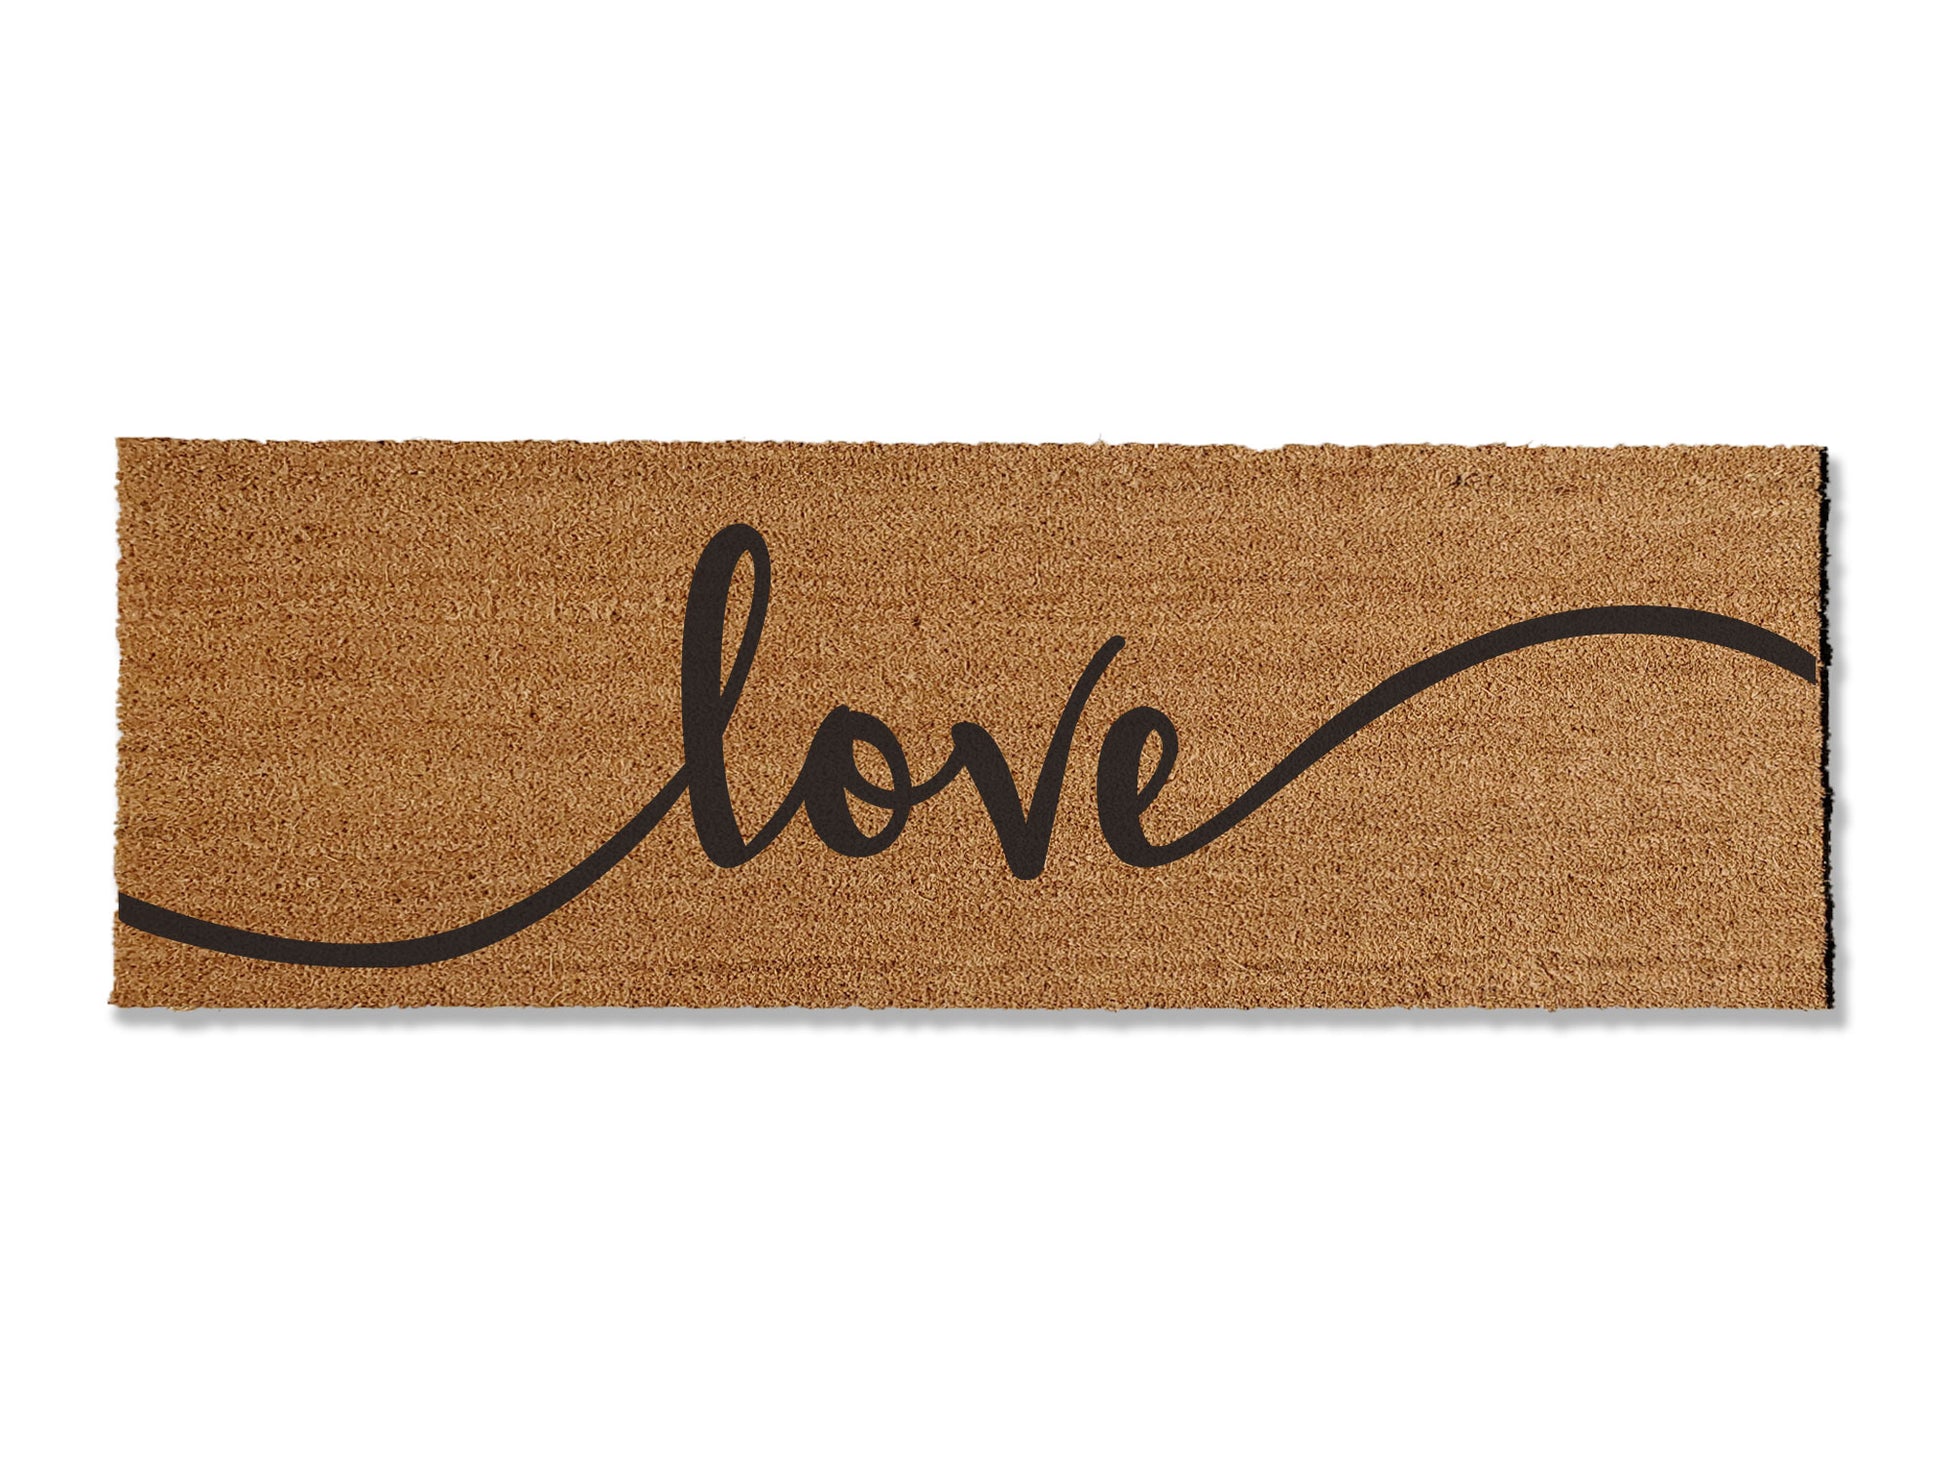 Spread love at your doorstep with our coir doormat featuring the word 'Love' sprawled across the entire surface. Available in multiple sizes, this stylish mat not only adds a touch of warmth to your entryway but is also highly effective at trapping dirt. Welcome guests with both love and functionality using this charming coir doormat.